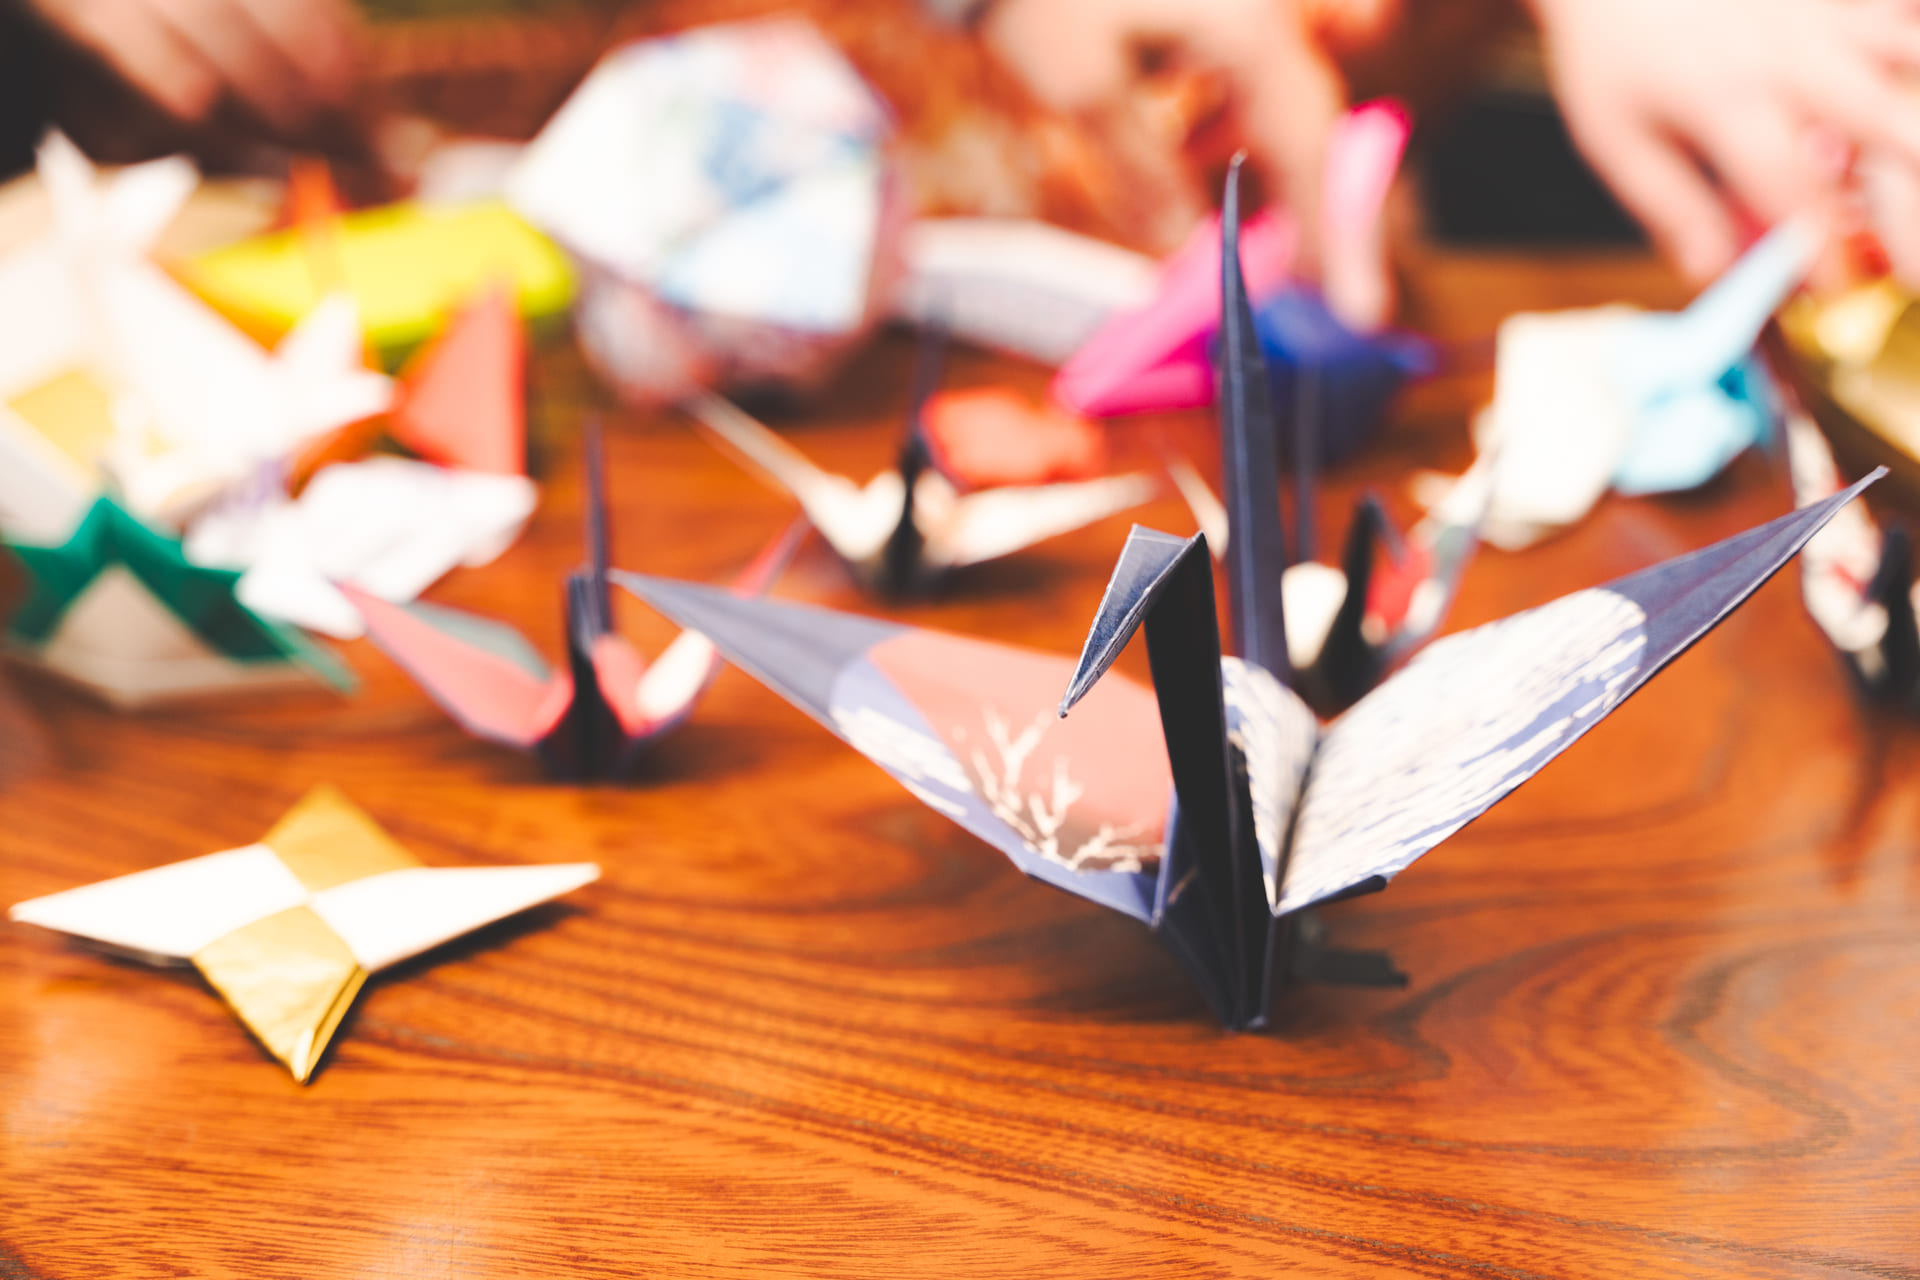 Japanese Cultural Experiences at Kyoto Abeya. Close-up of assorted colorful origami figures on a wooden table, including a prominently featured blue crane.